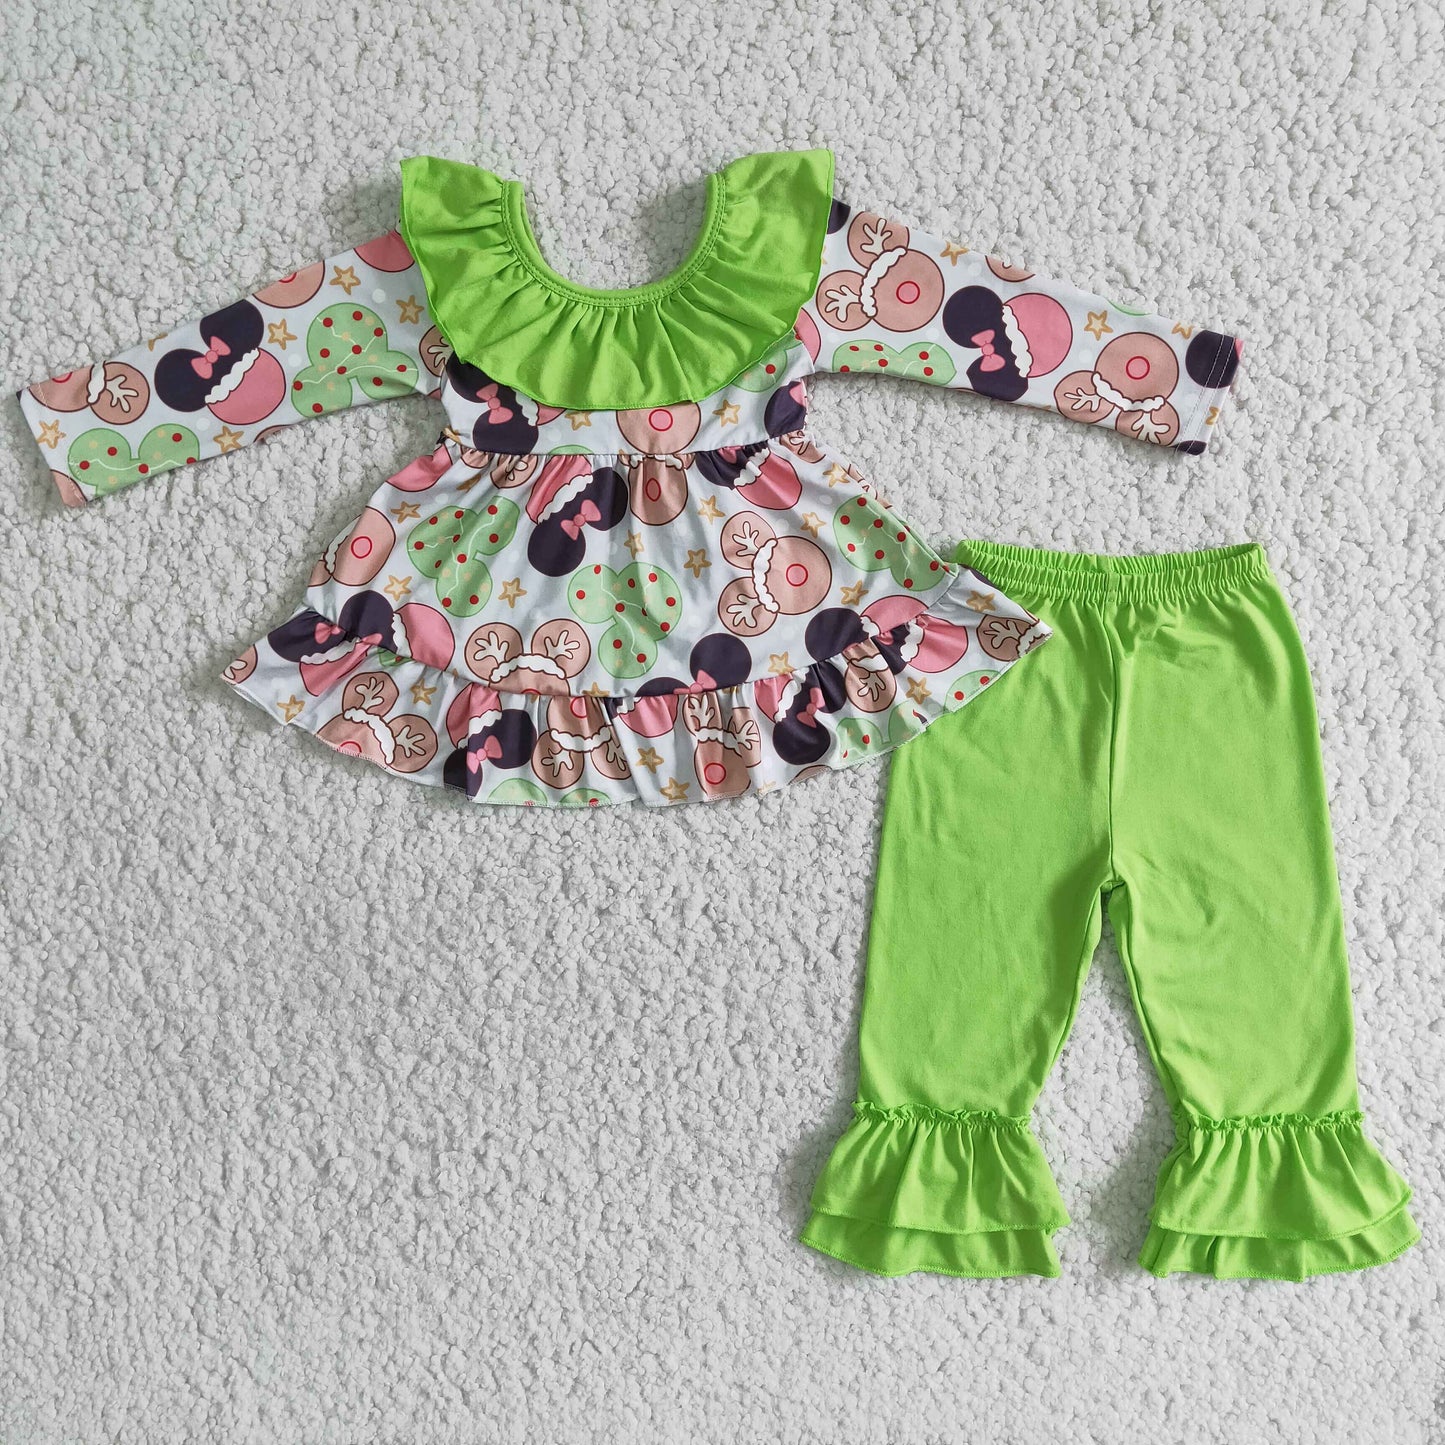 6 B2-40 Mickey bow top green pants suit